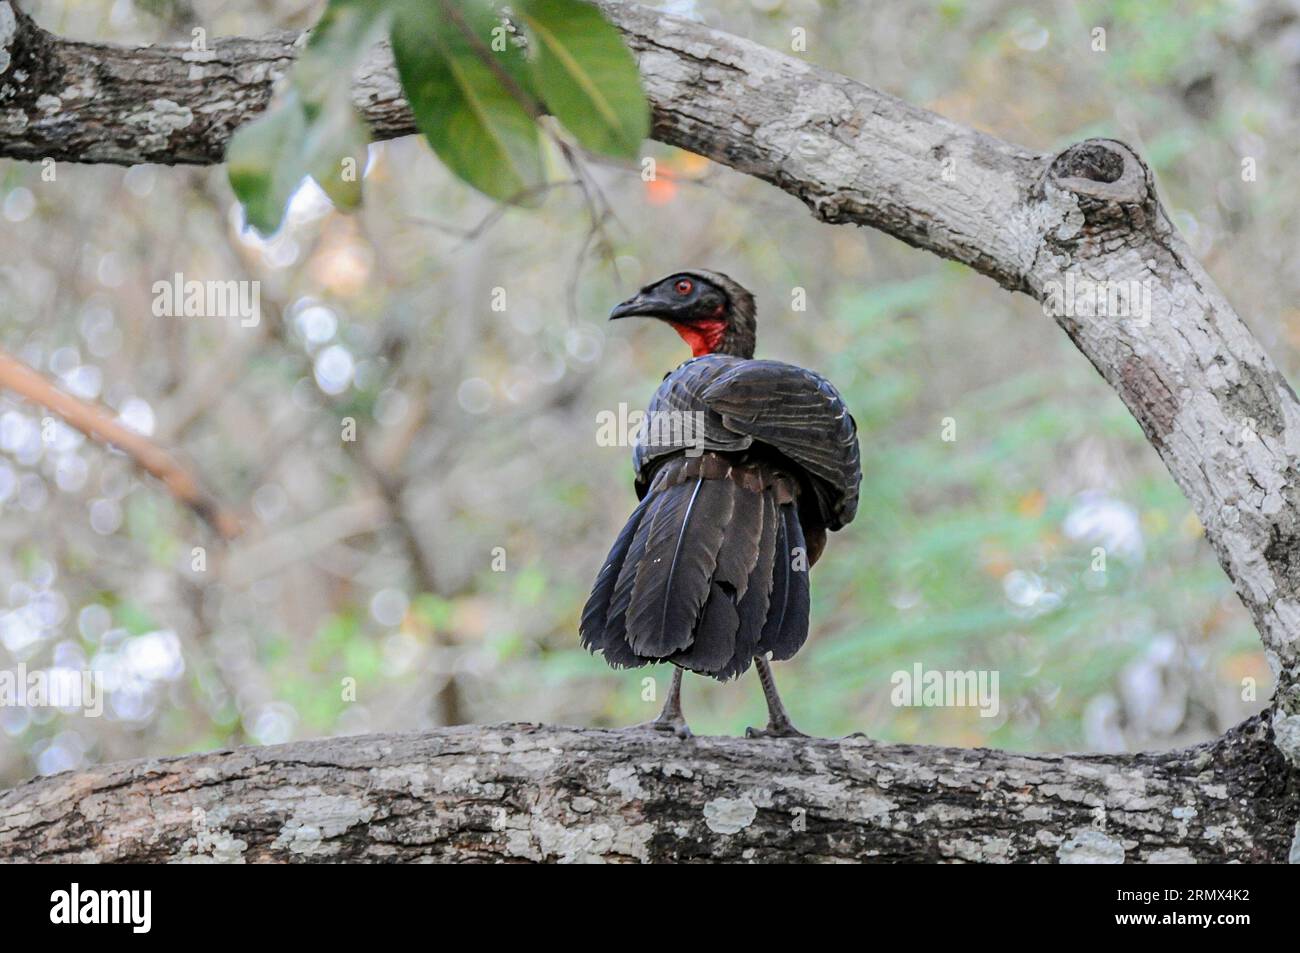 Dusky-legged Guan, Penelope obscura, perching on a branch in the Pantanal, Mato Grosso, Brazil, South America Stock Photo